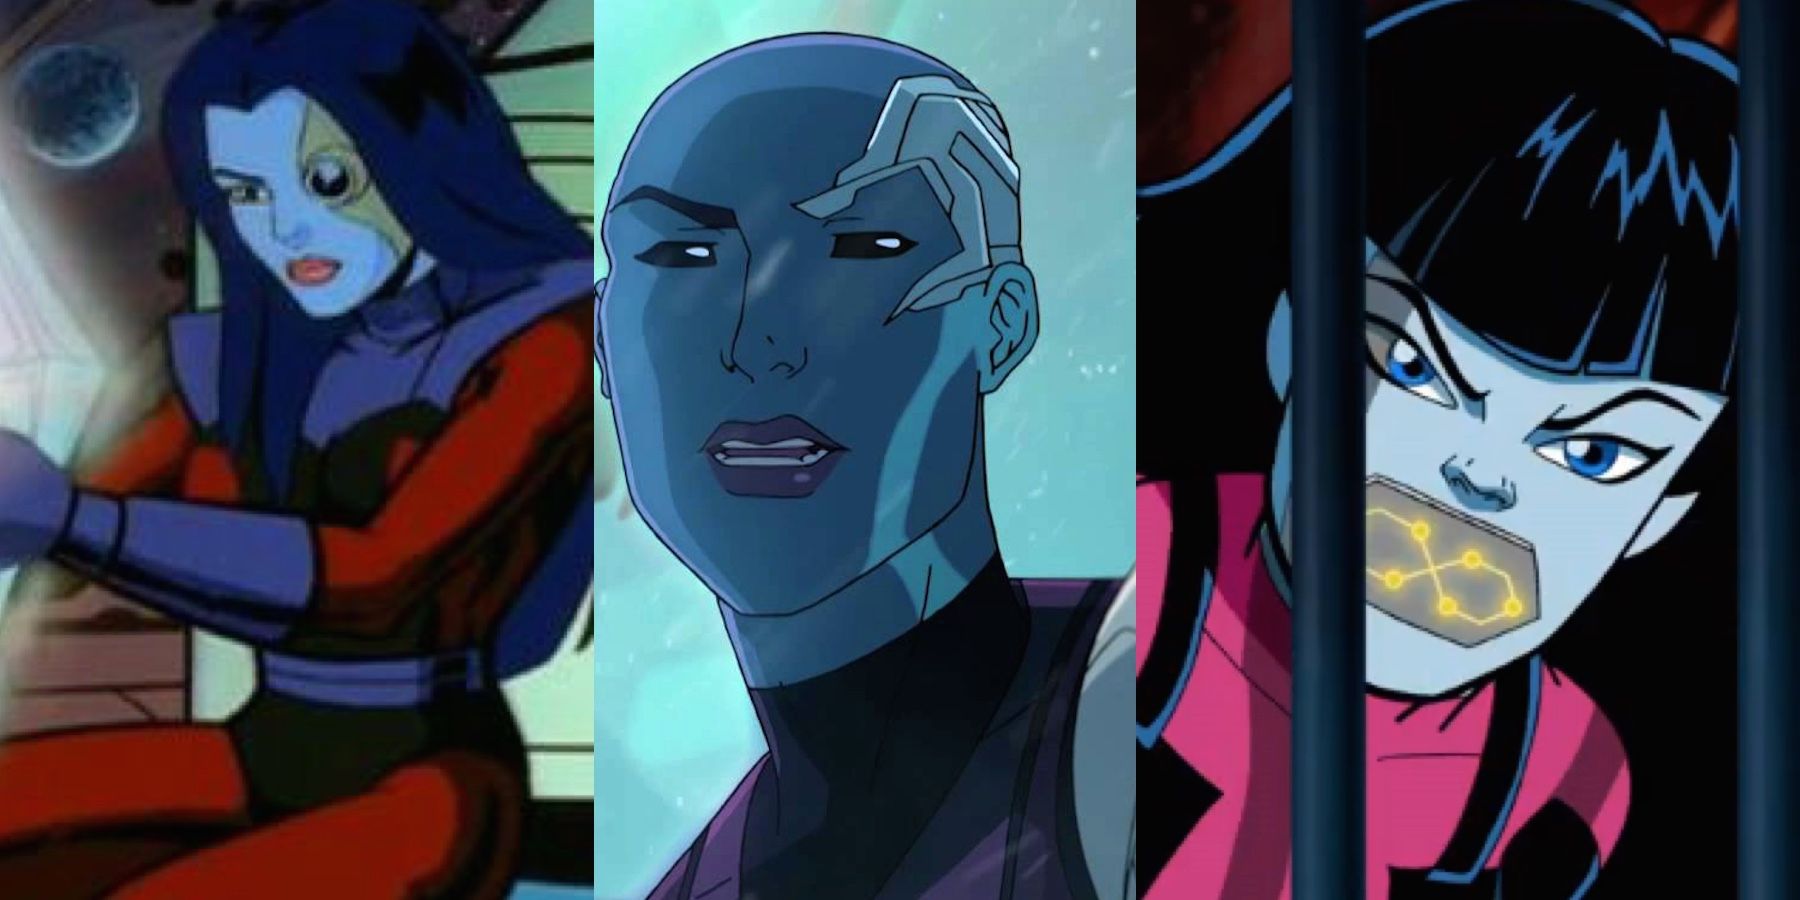 A split image features three different versions of the Nebula animated character